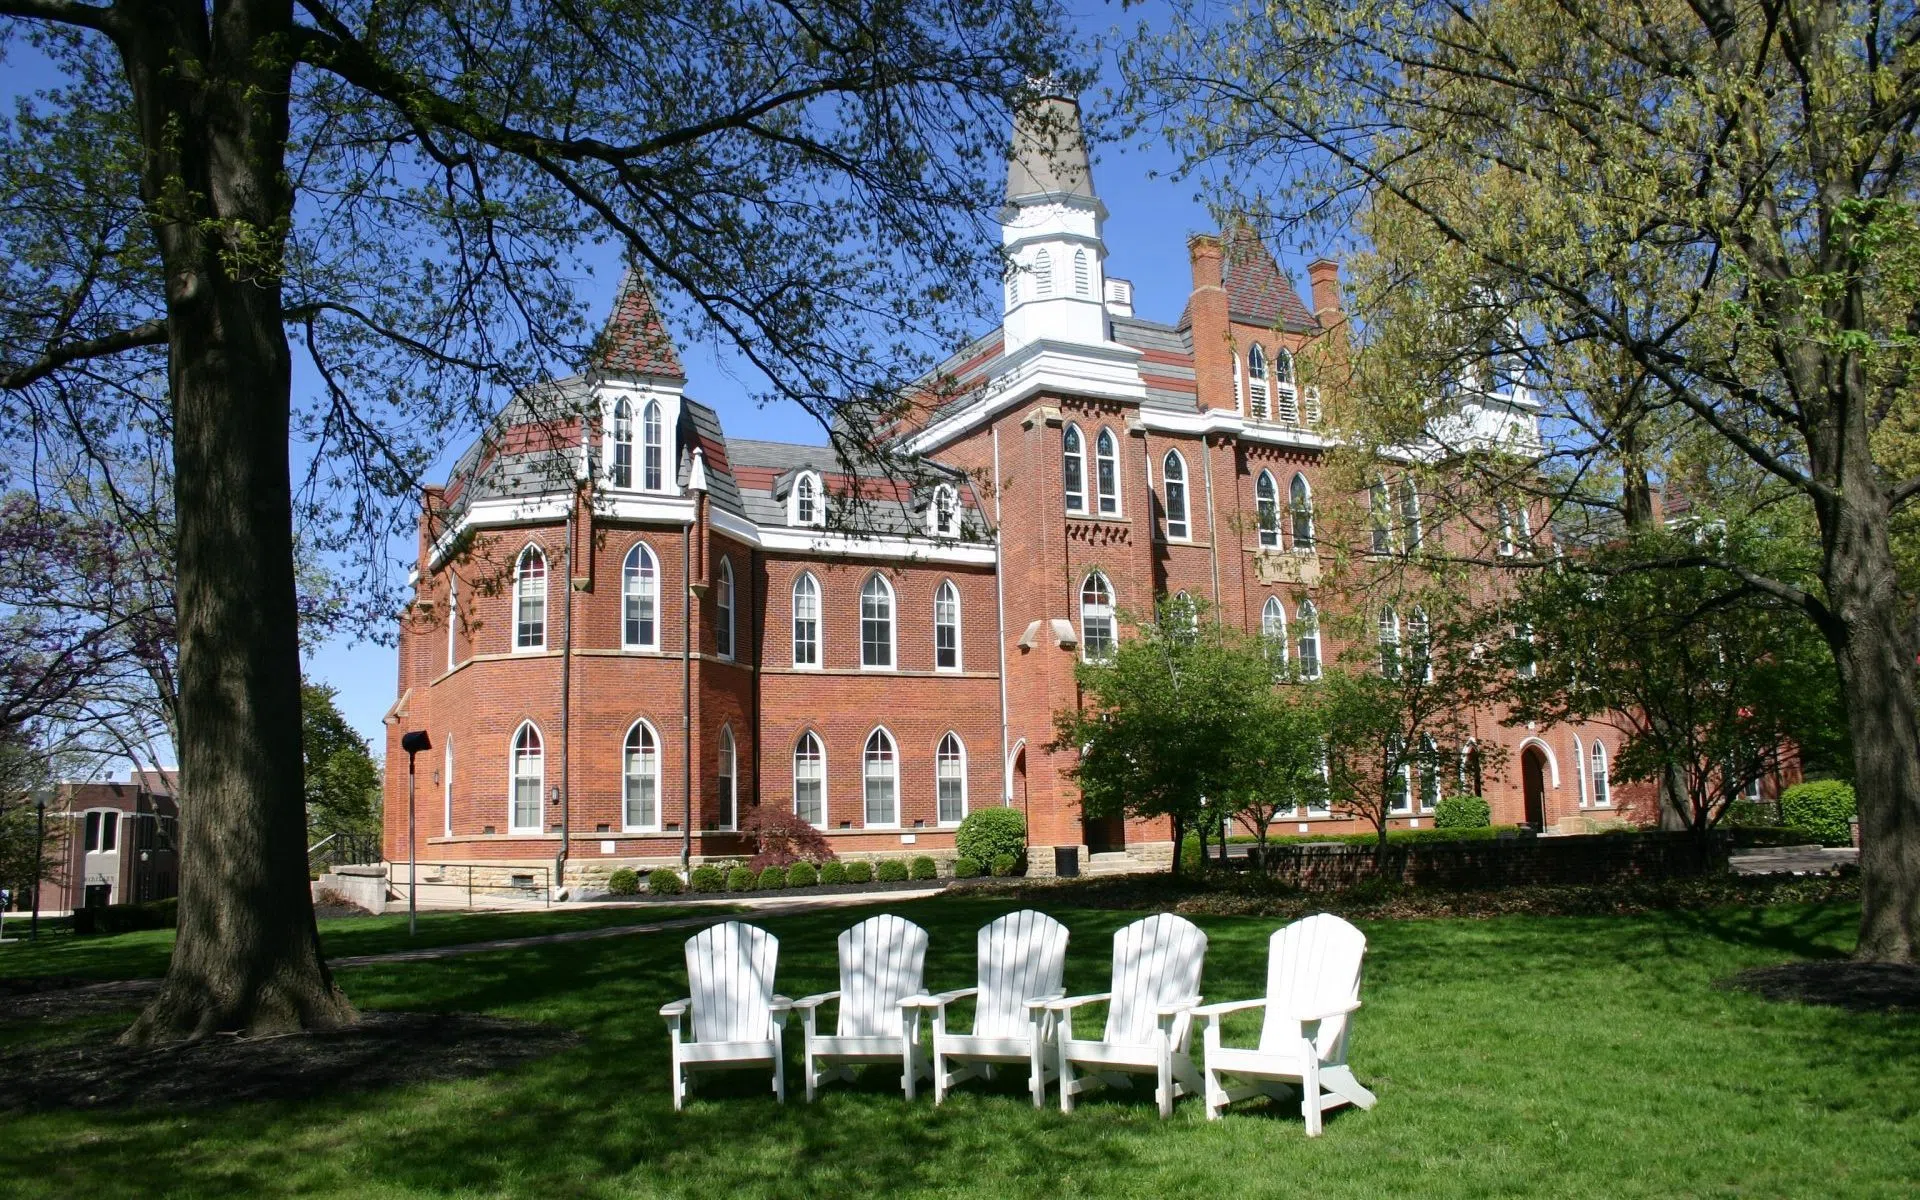 Angled view of Towers Hall and surrounding grounds showing a group of Adirondack Chairs.